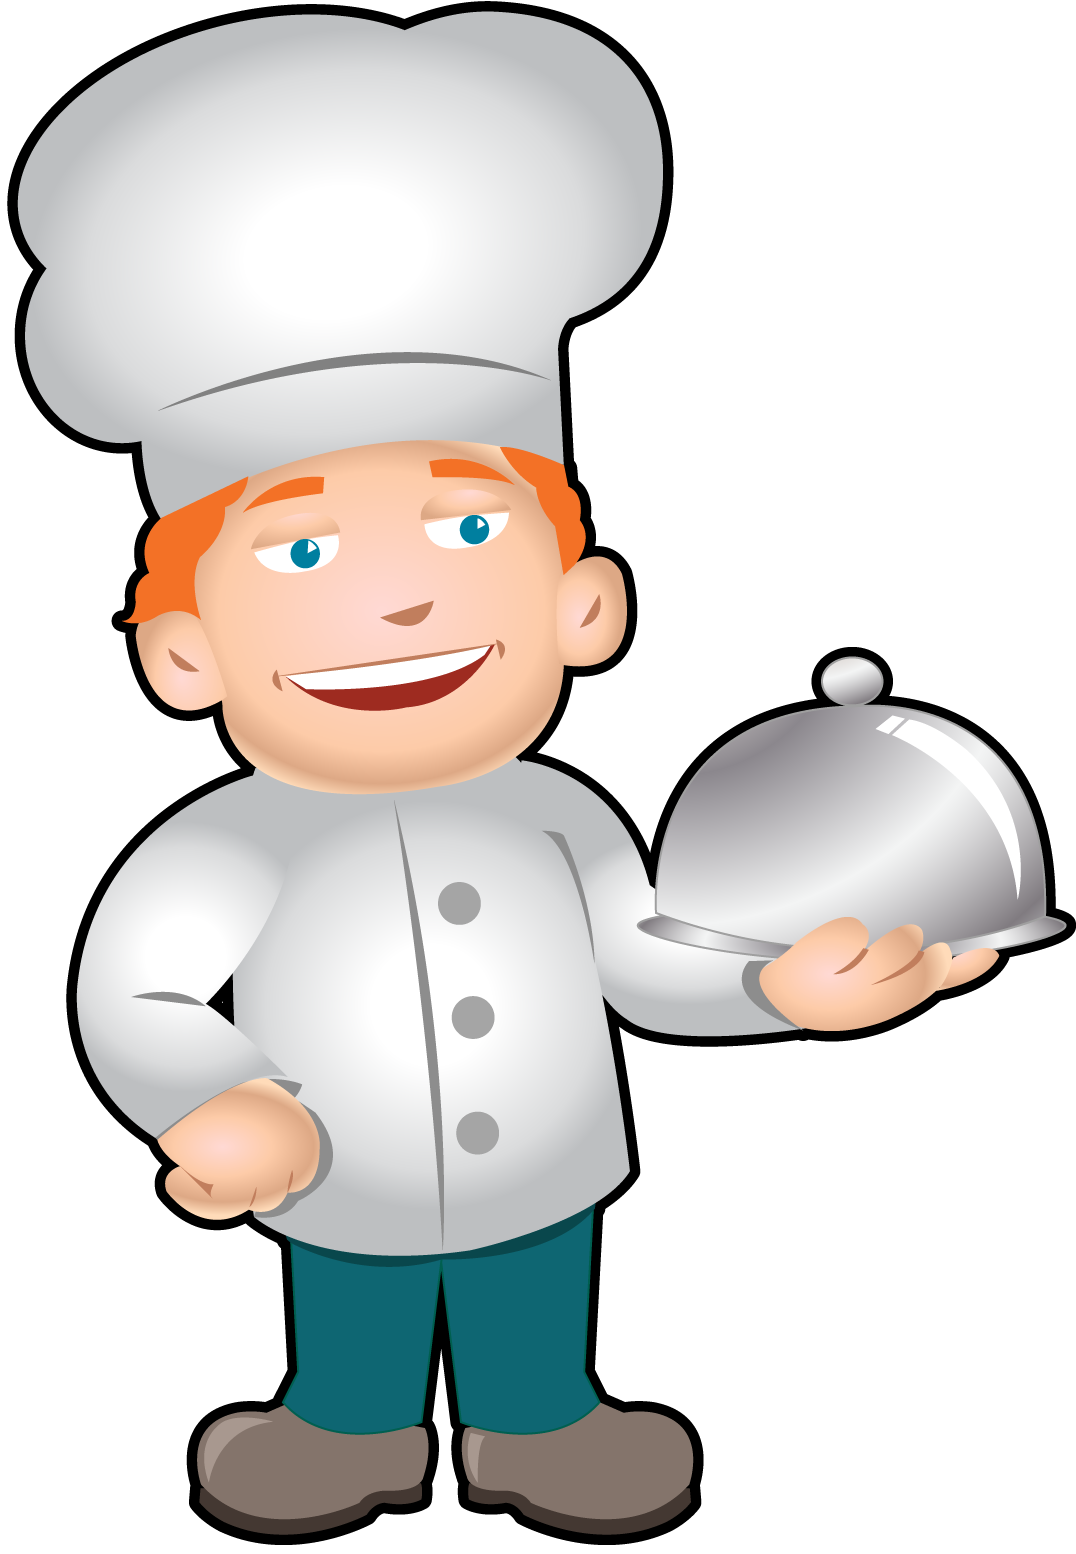 Clip Art  Characters   Mascots   Occupational Characters   The Chef